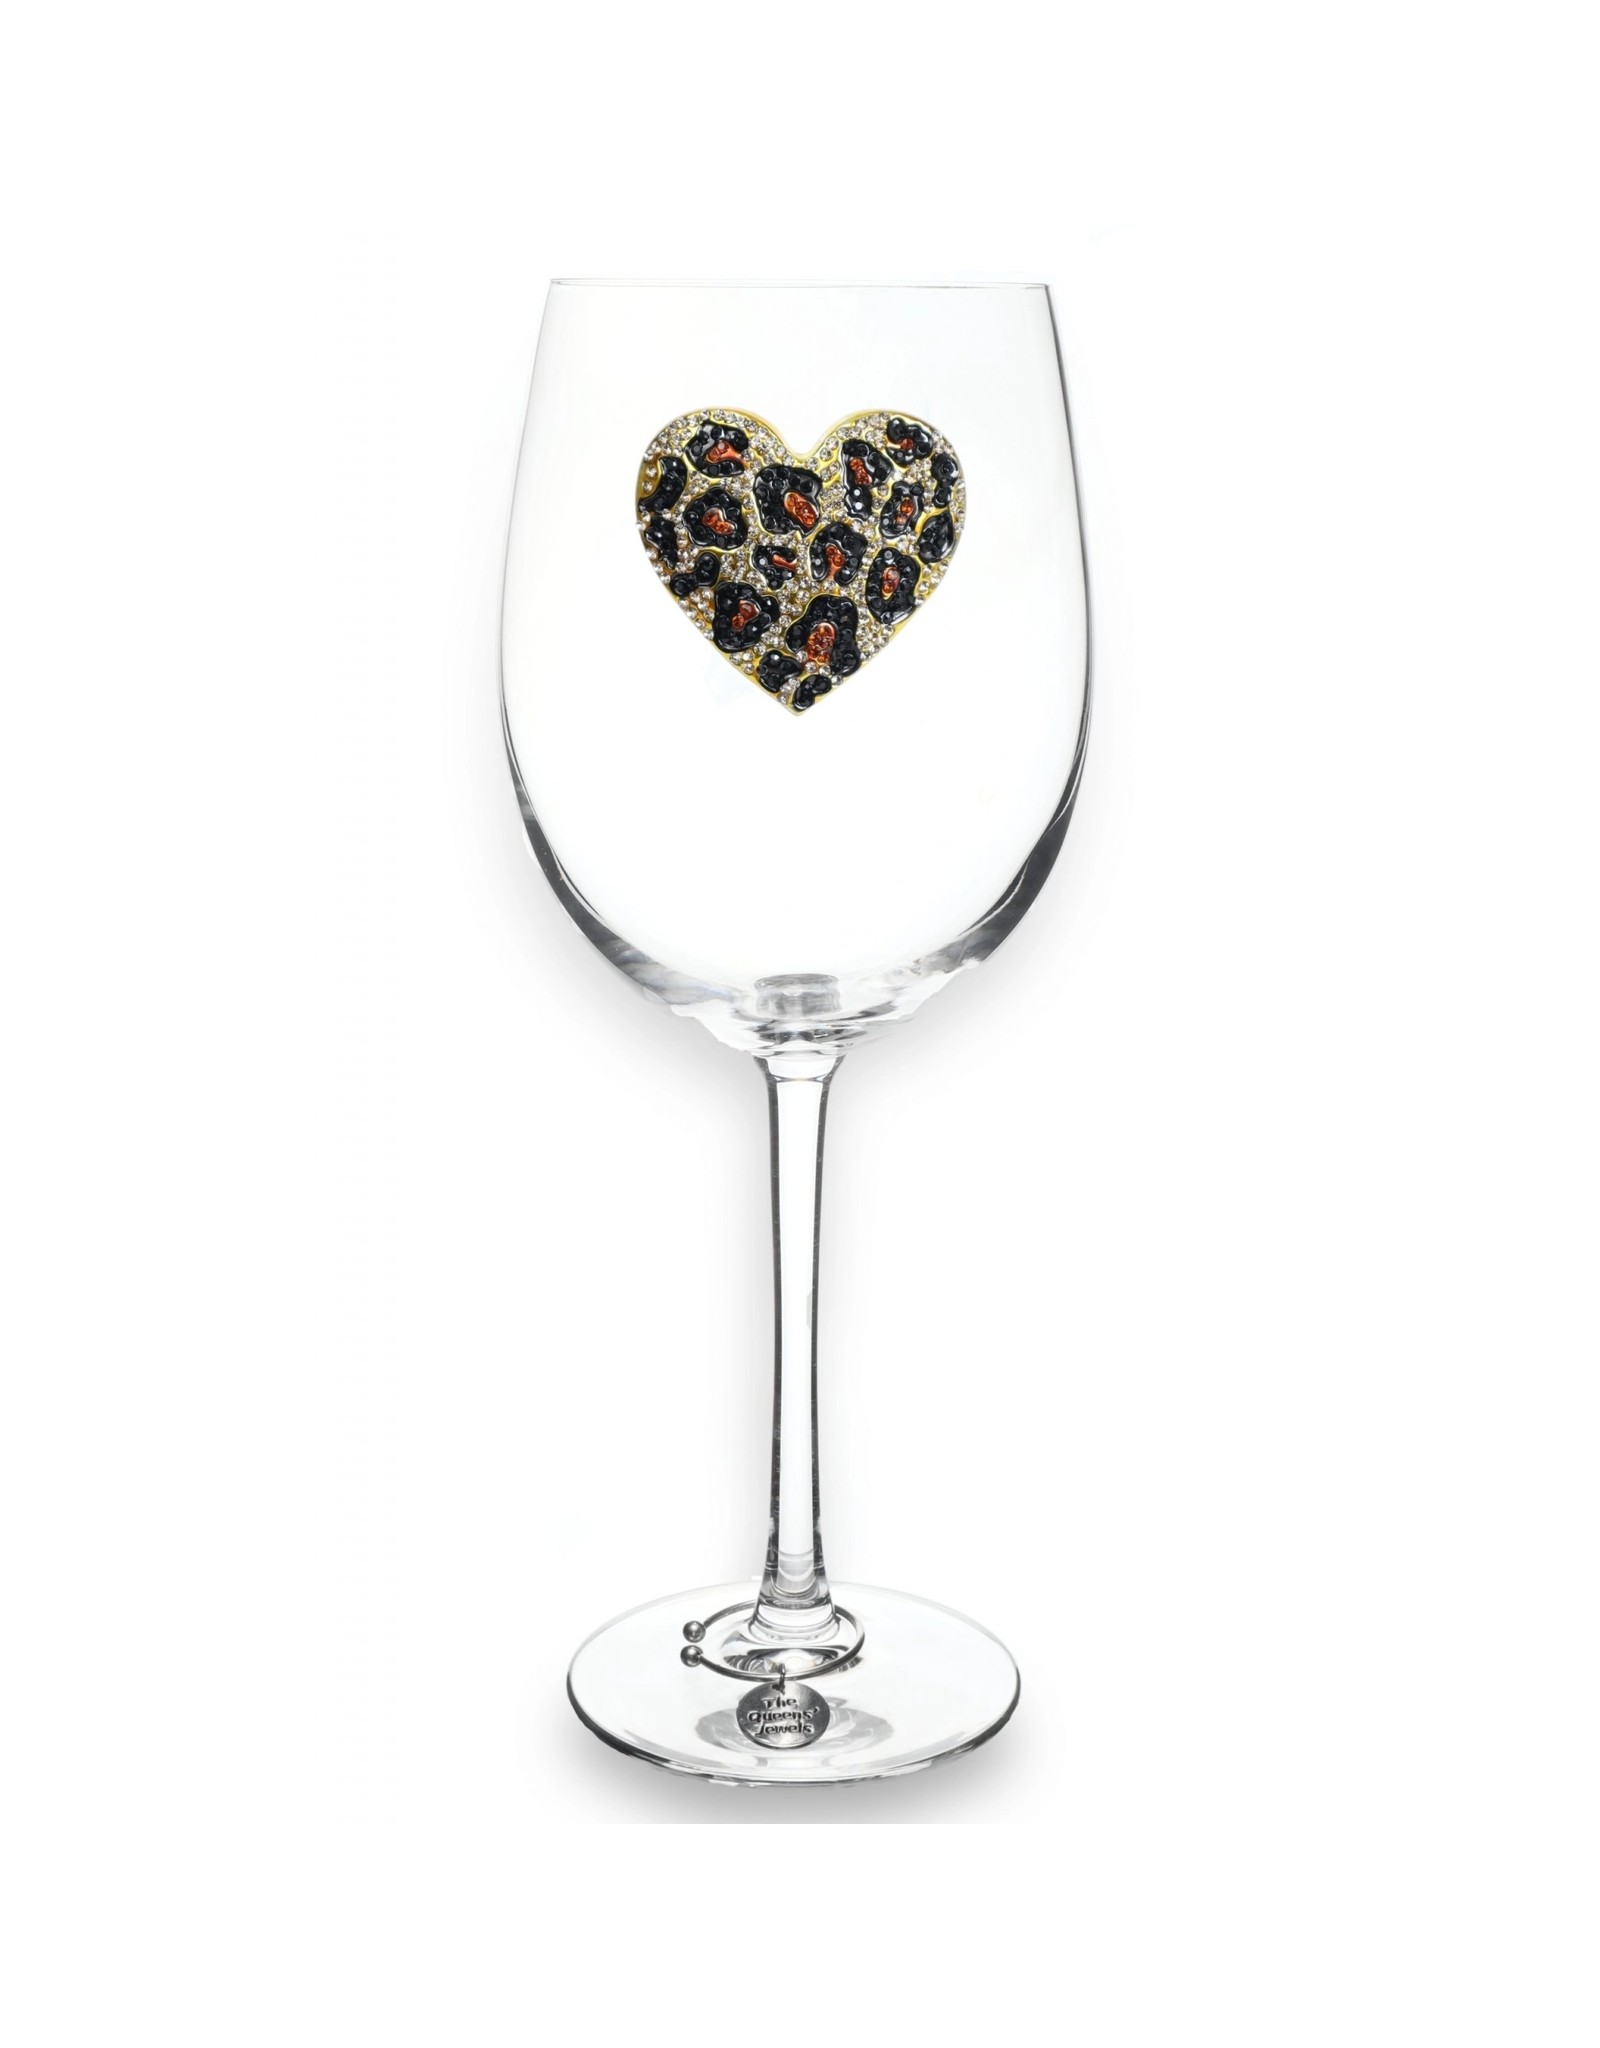 The Queen's Jewels Leopard Heart Jeweled Stemmed Wine Glass